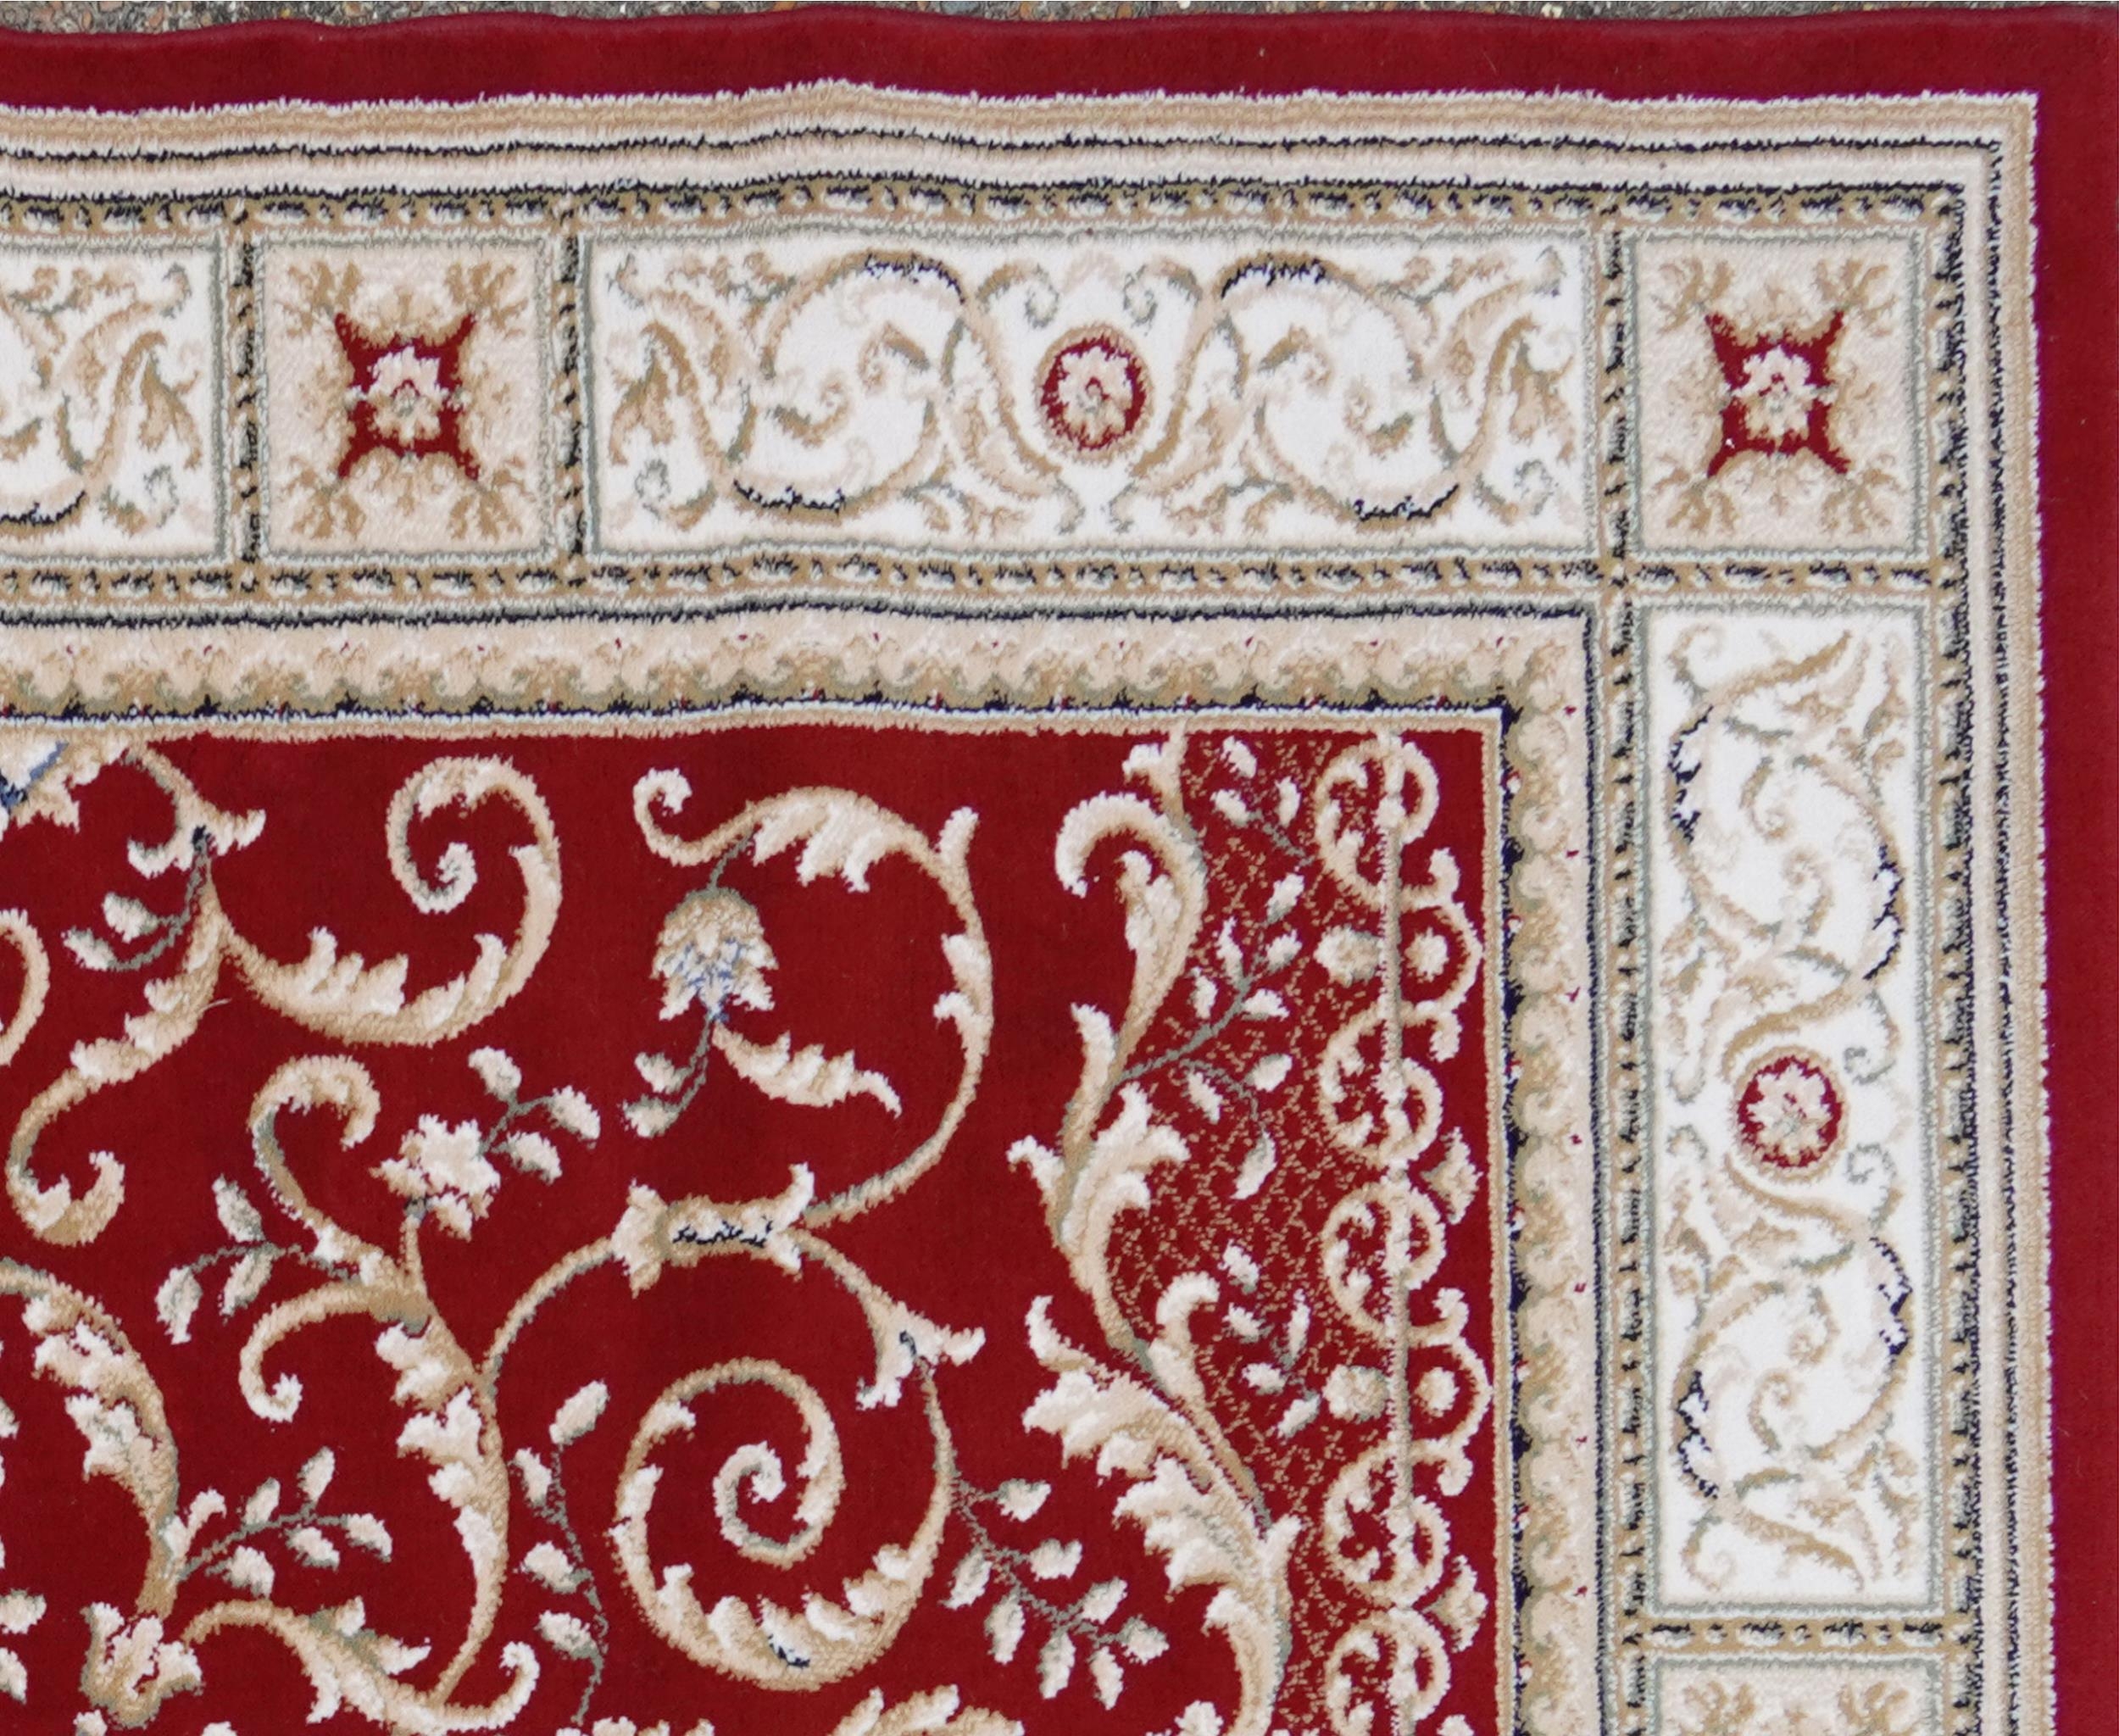 Rectangular red and cream ground floral rug, 230cm x 160cm - Image 5 of 7